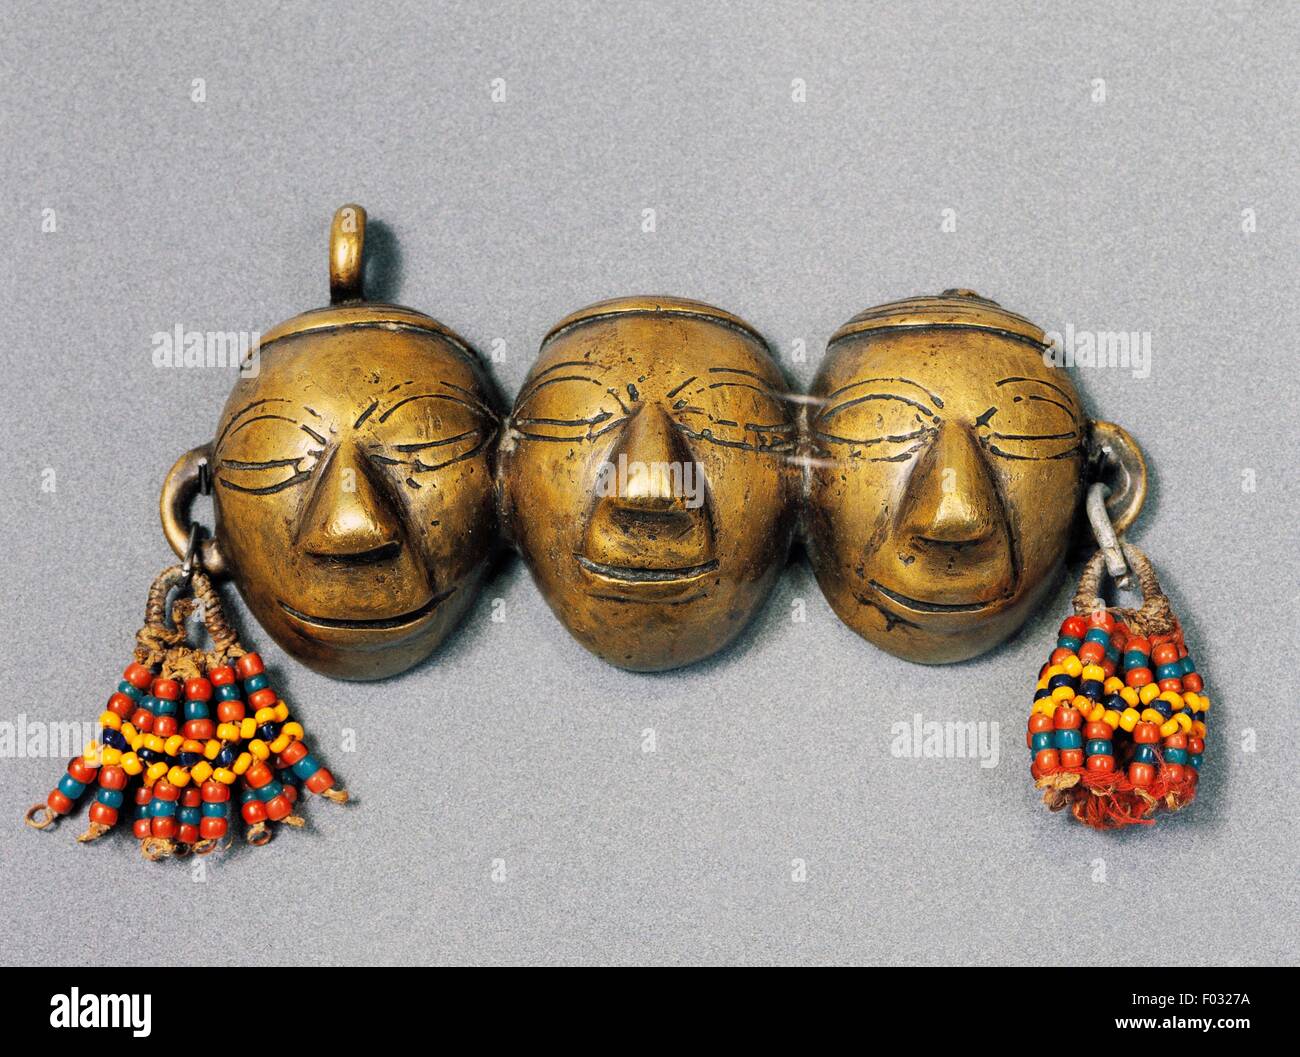 Men's necklace with pendants depicting faces and decorated with colored ...